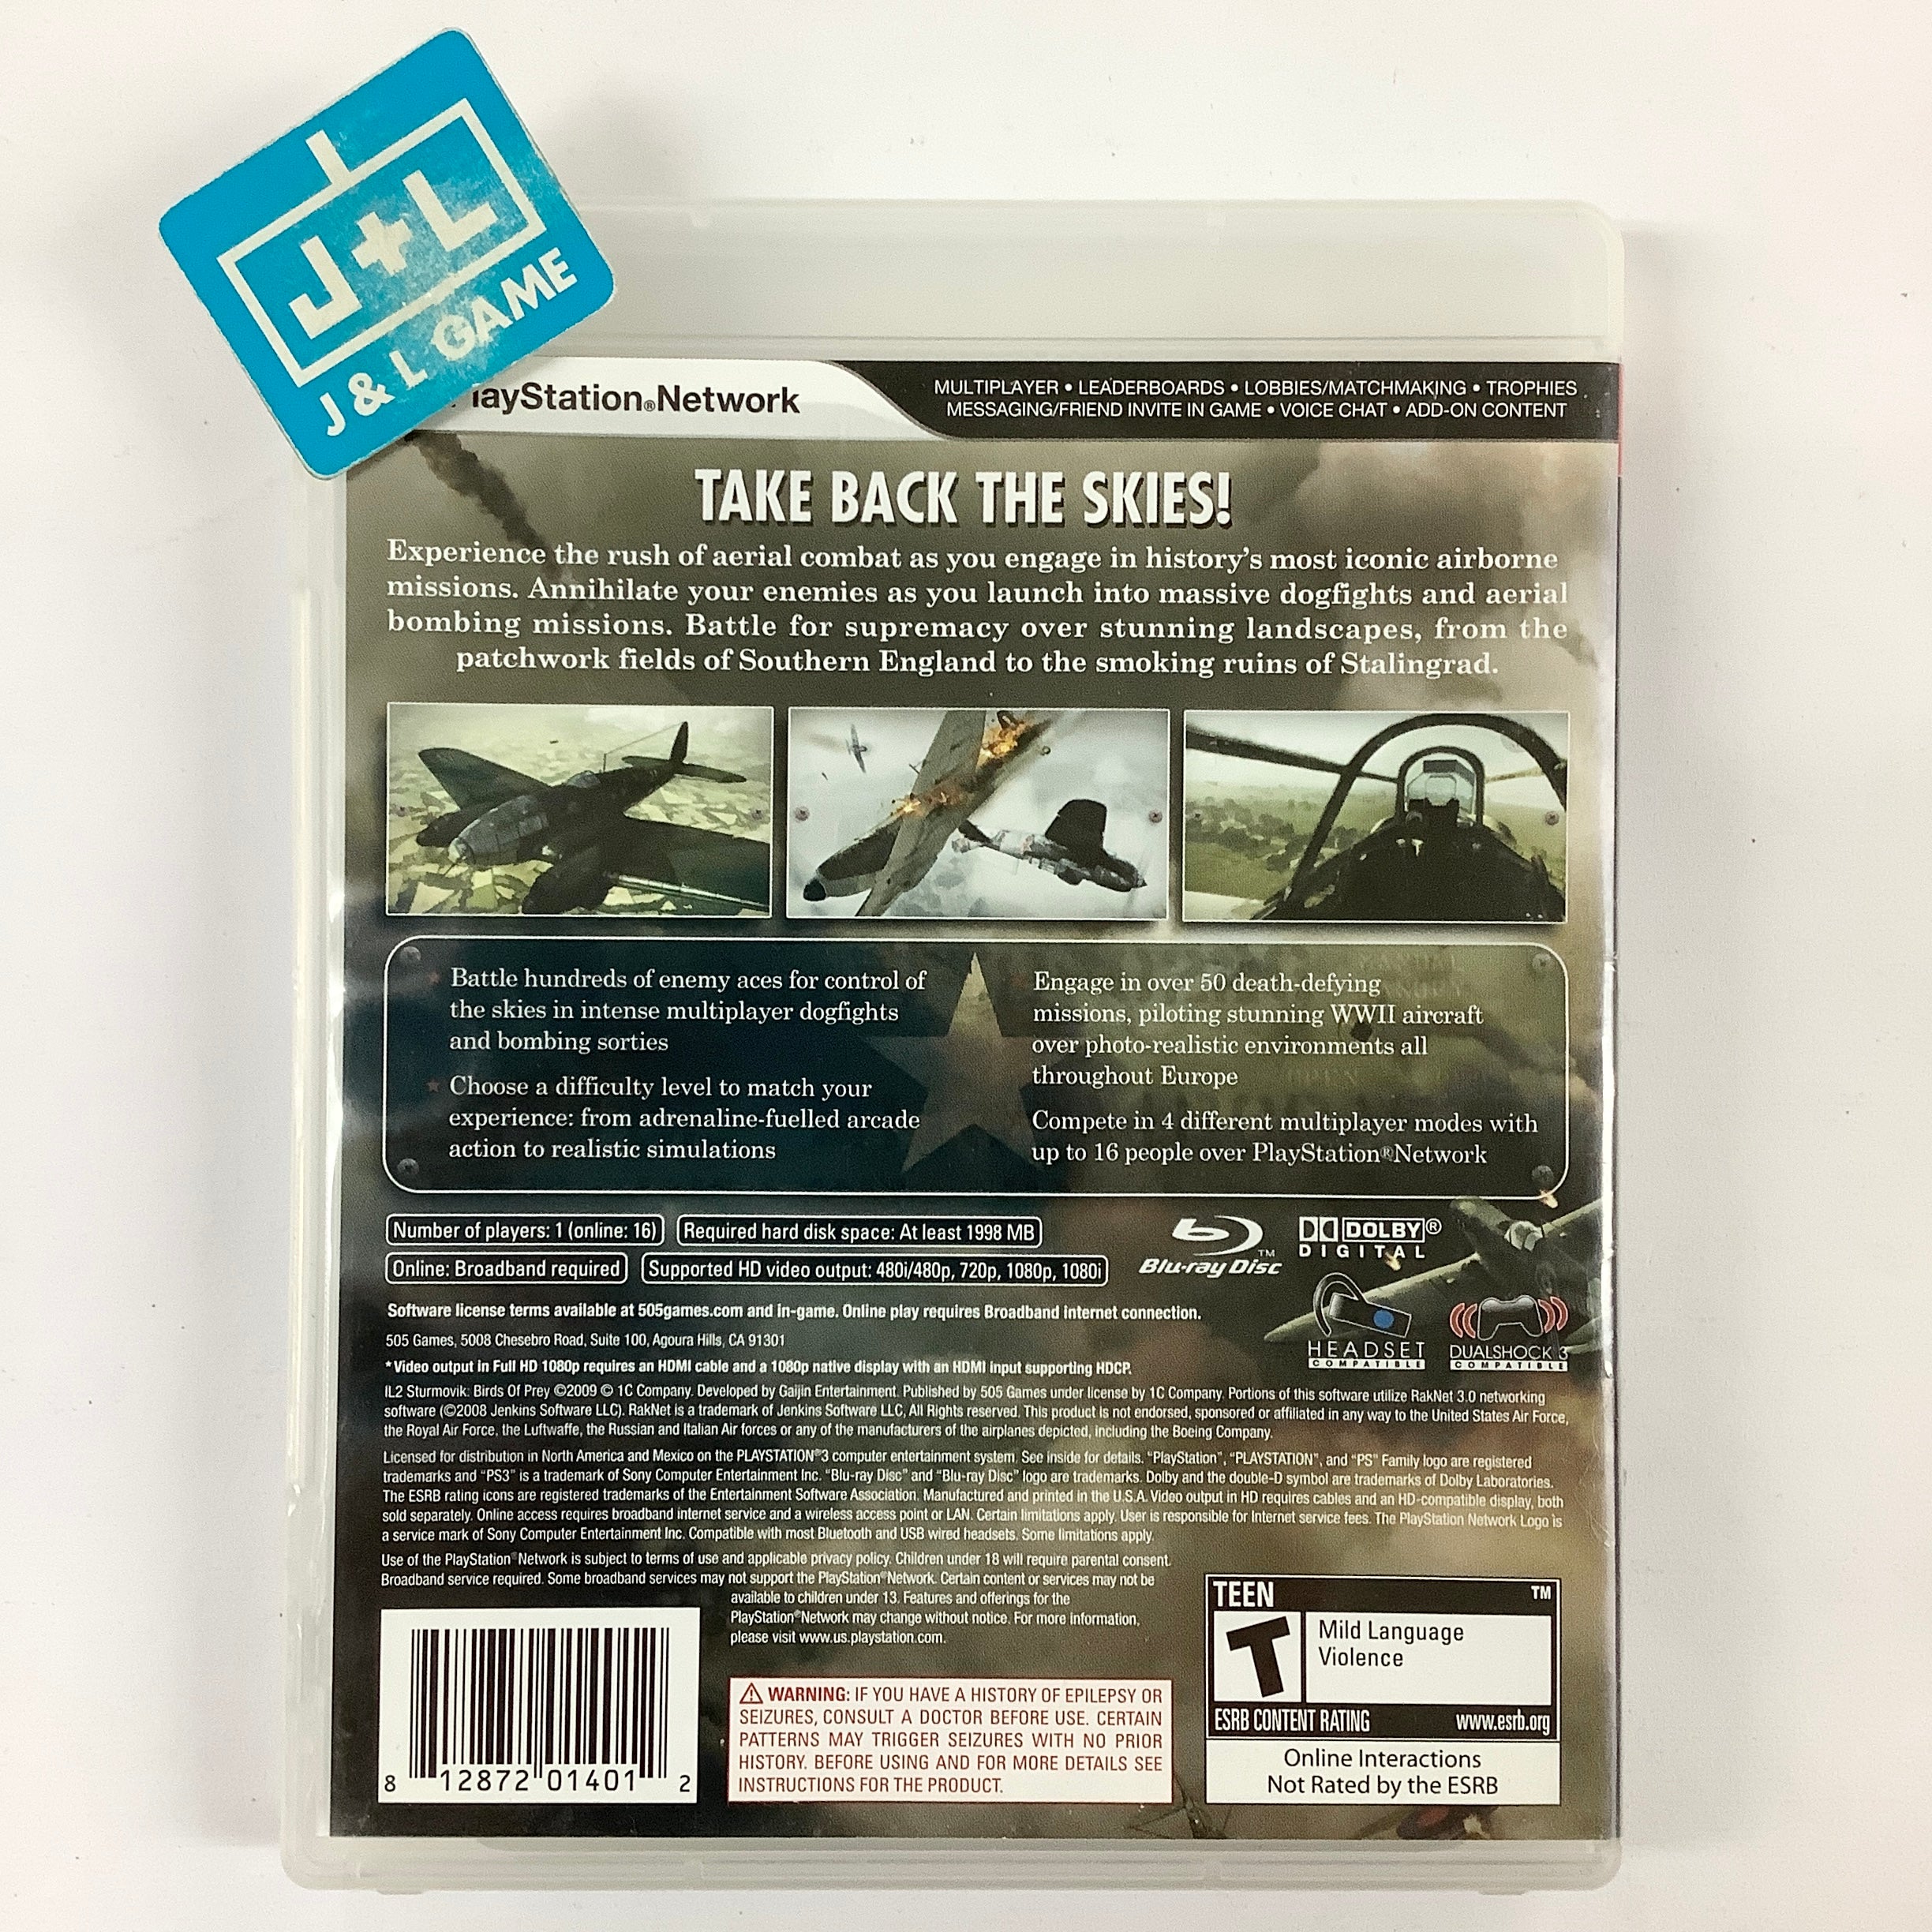 IL-2 Sturmovik: Birds of Prey - (PS3) PlayStation 3 [Pre-Owned] Video Games 505 Games   